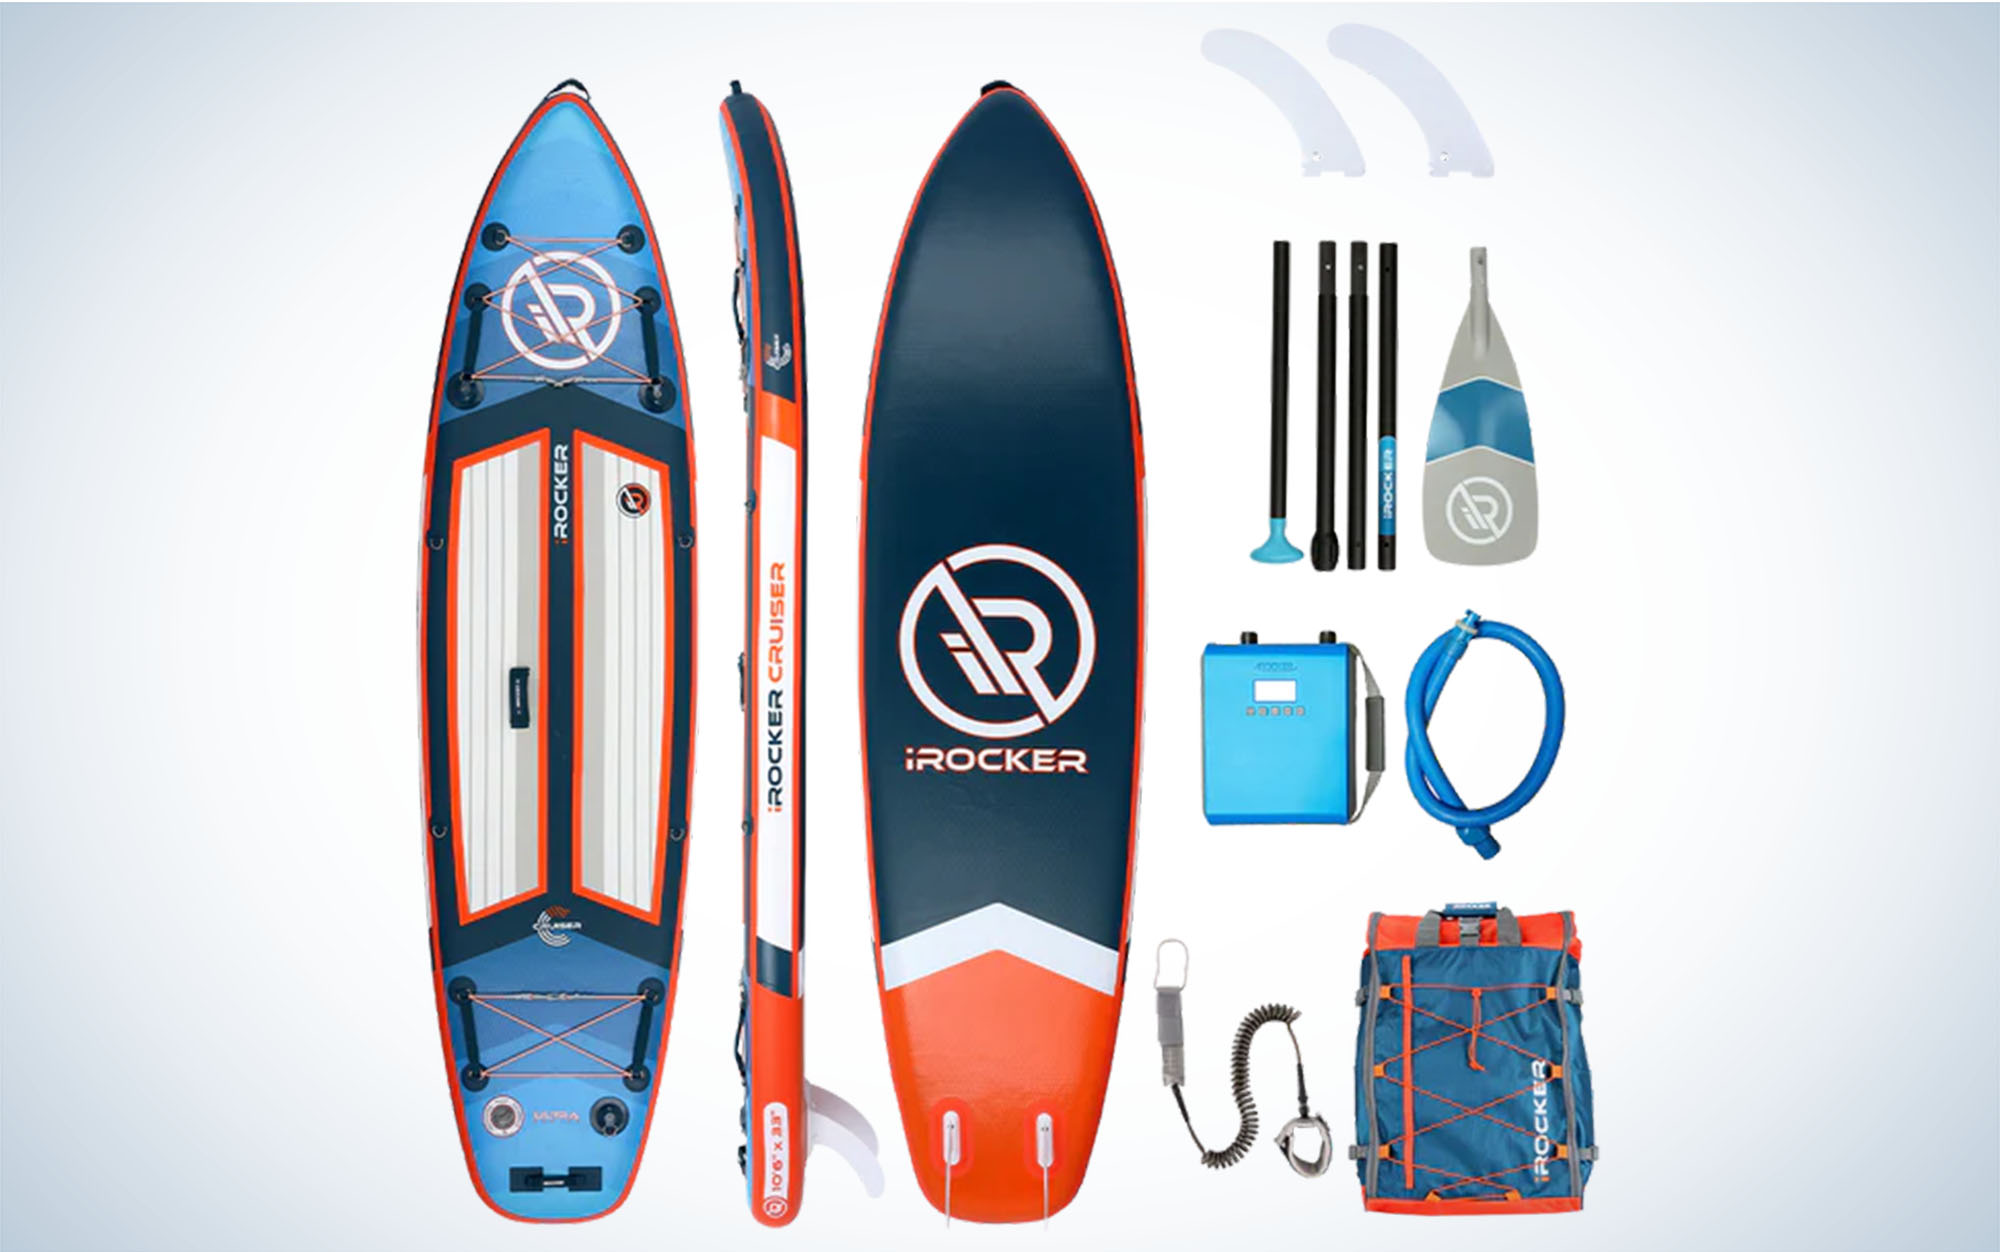 The iRocker Cruiser Ultra 2.0 is the easiest to set up.